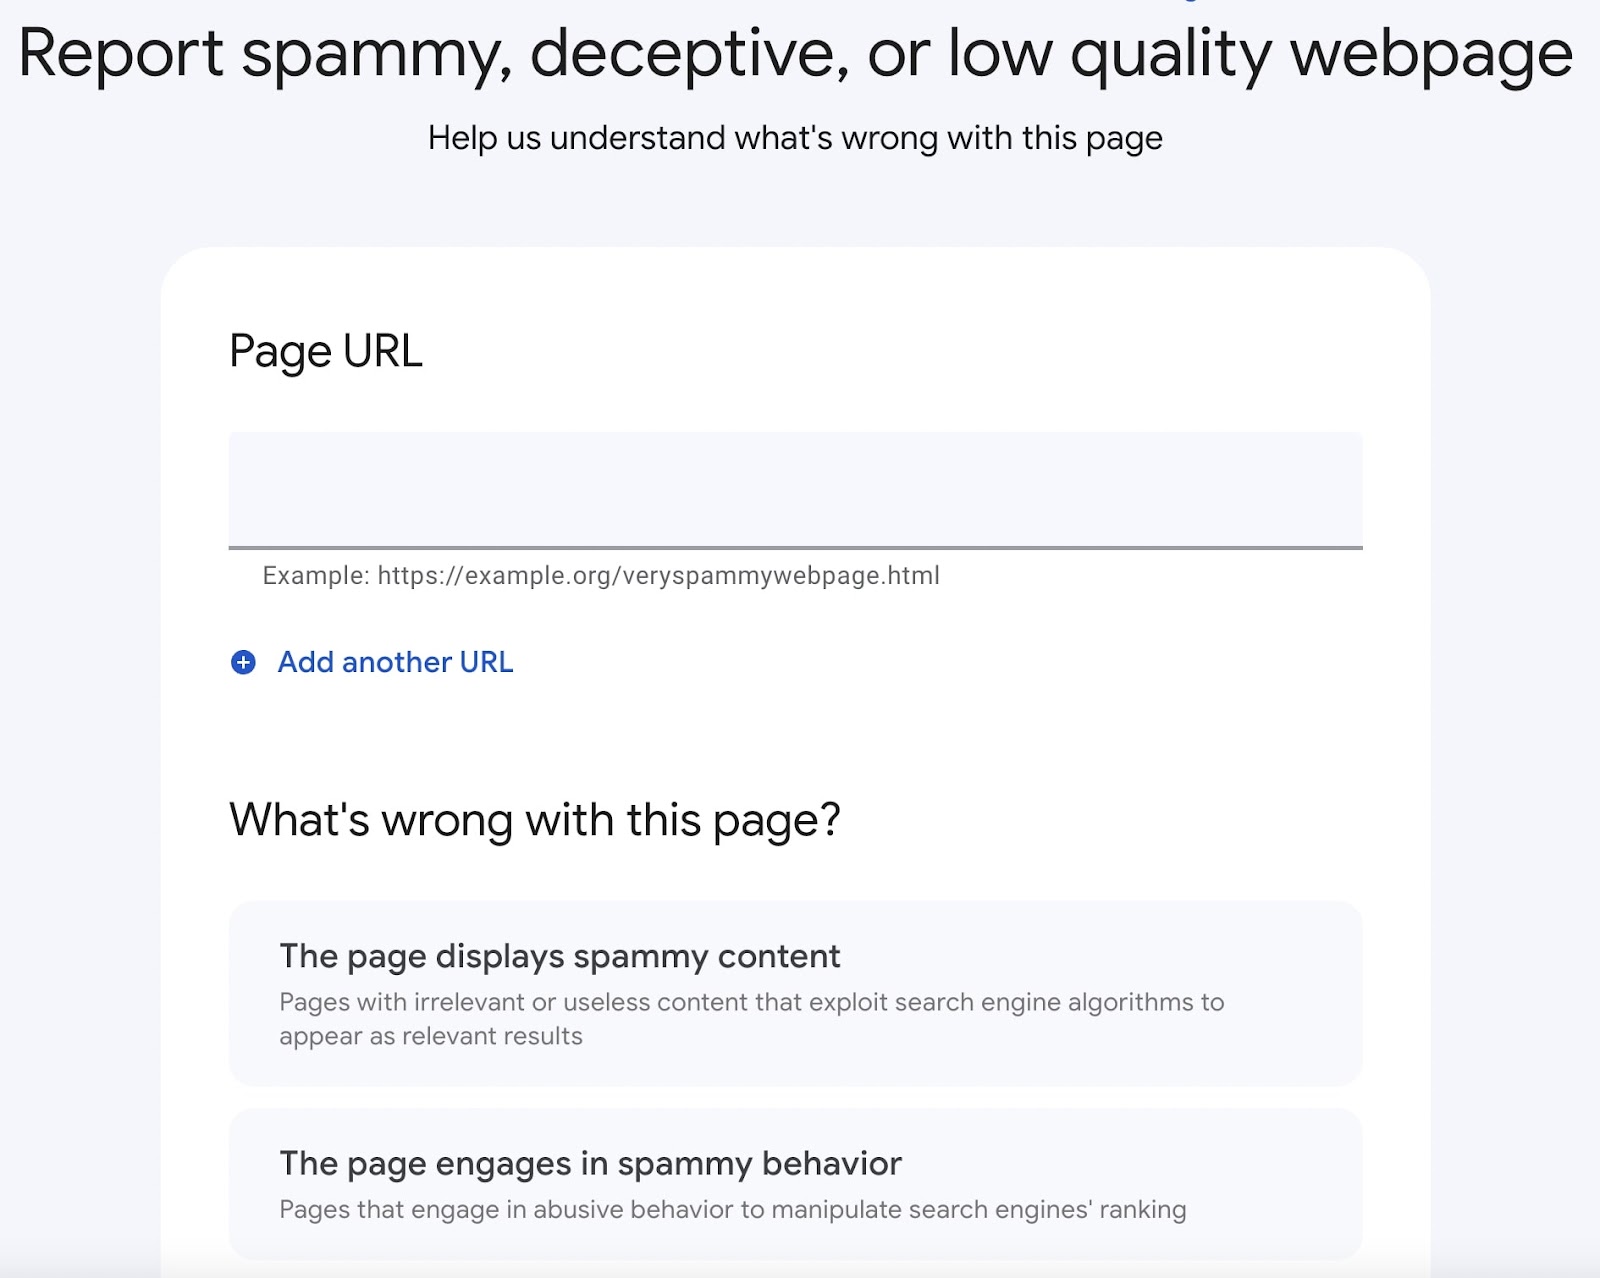 Google’s dedicated content spam form